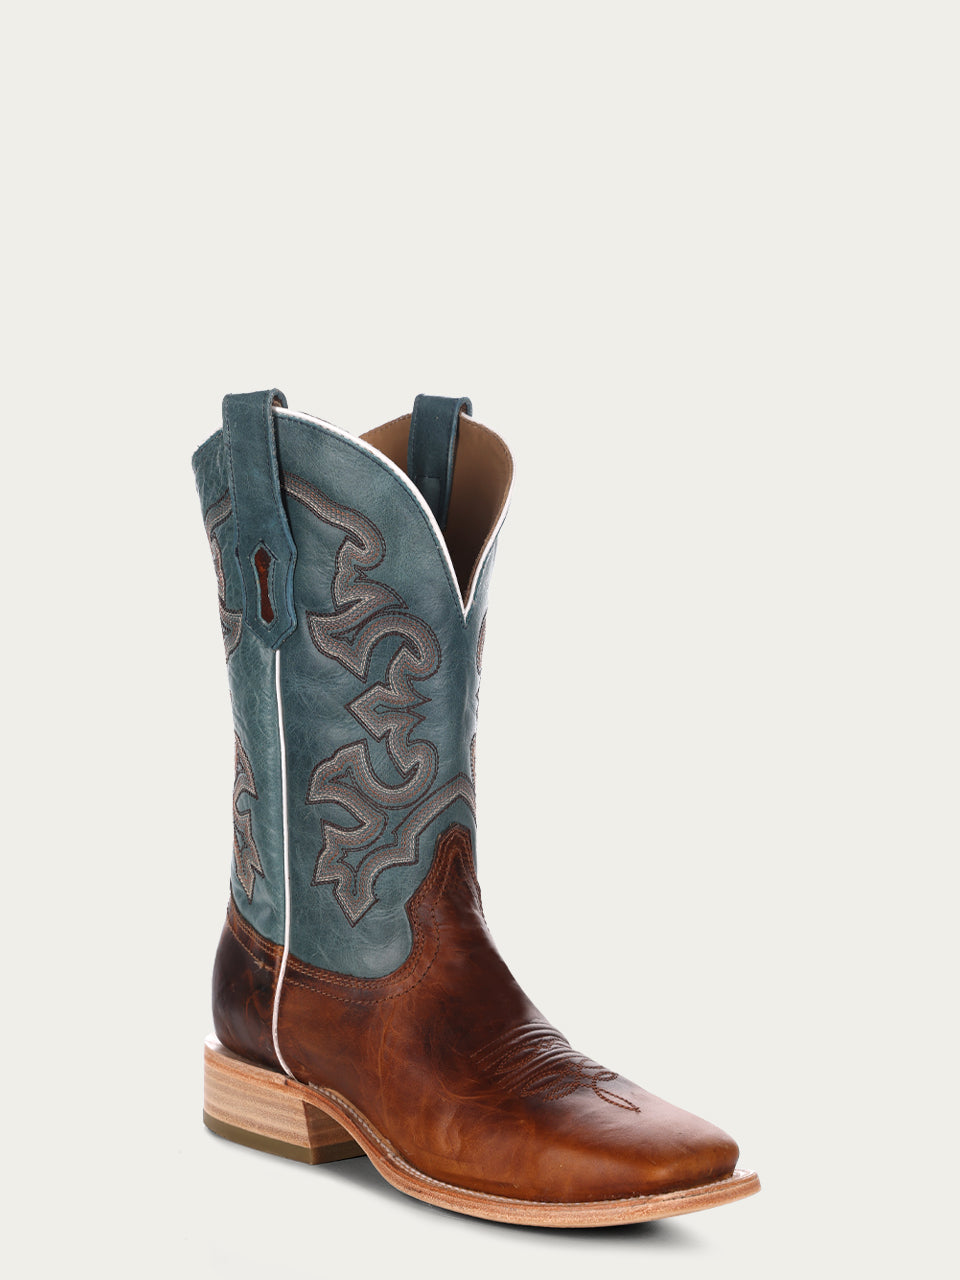 A4262 - MEN'S BLUE AND HONEY EMBROIDERY WIDE SQUARE TOE RODEO COWBOY BOOT